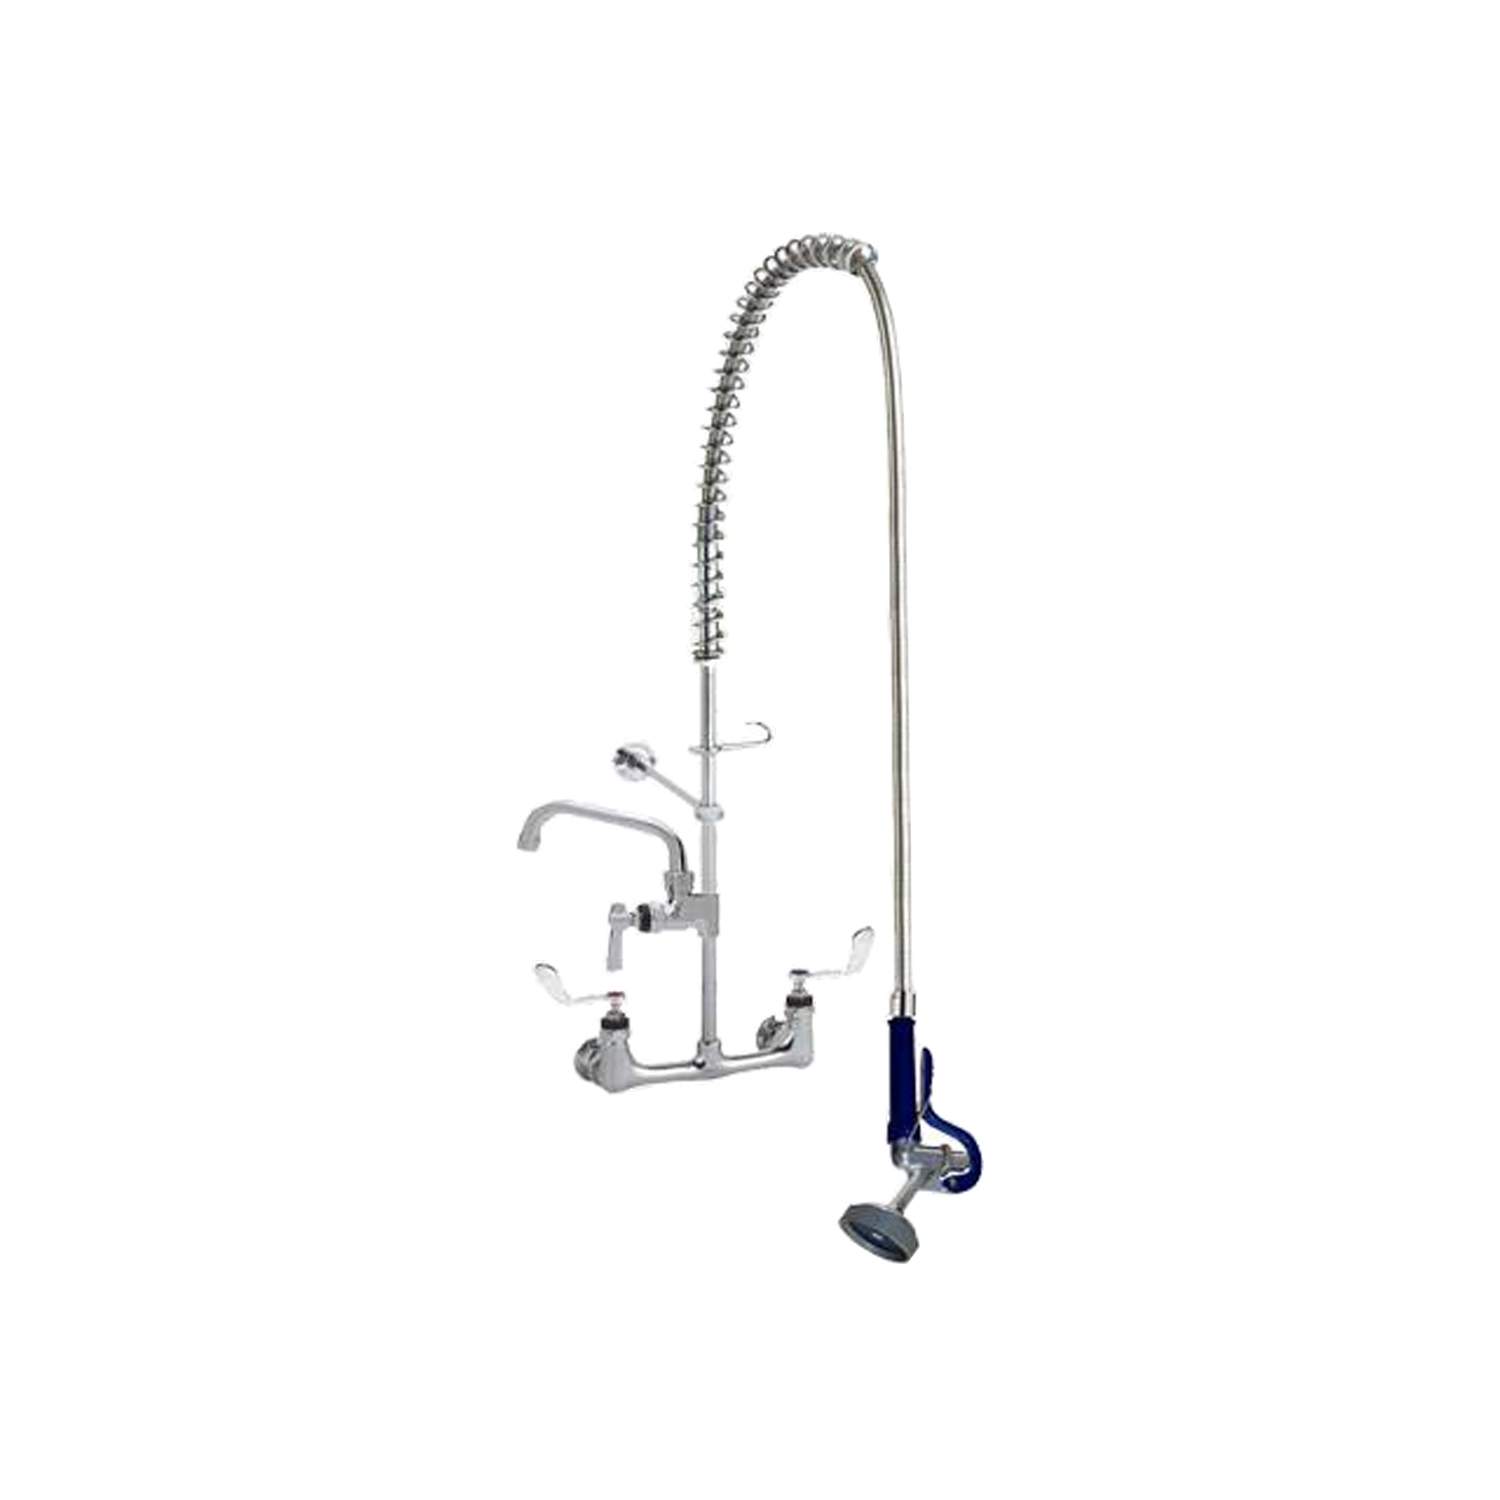 Wall Mount Sprayer with Swivel Nozzle